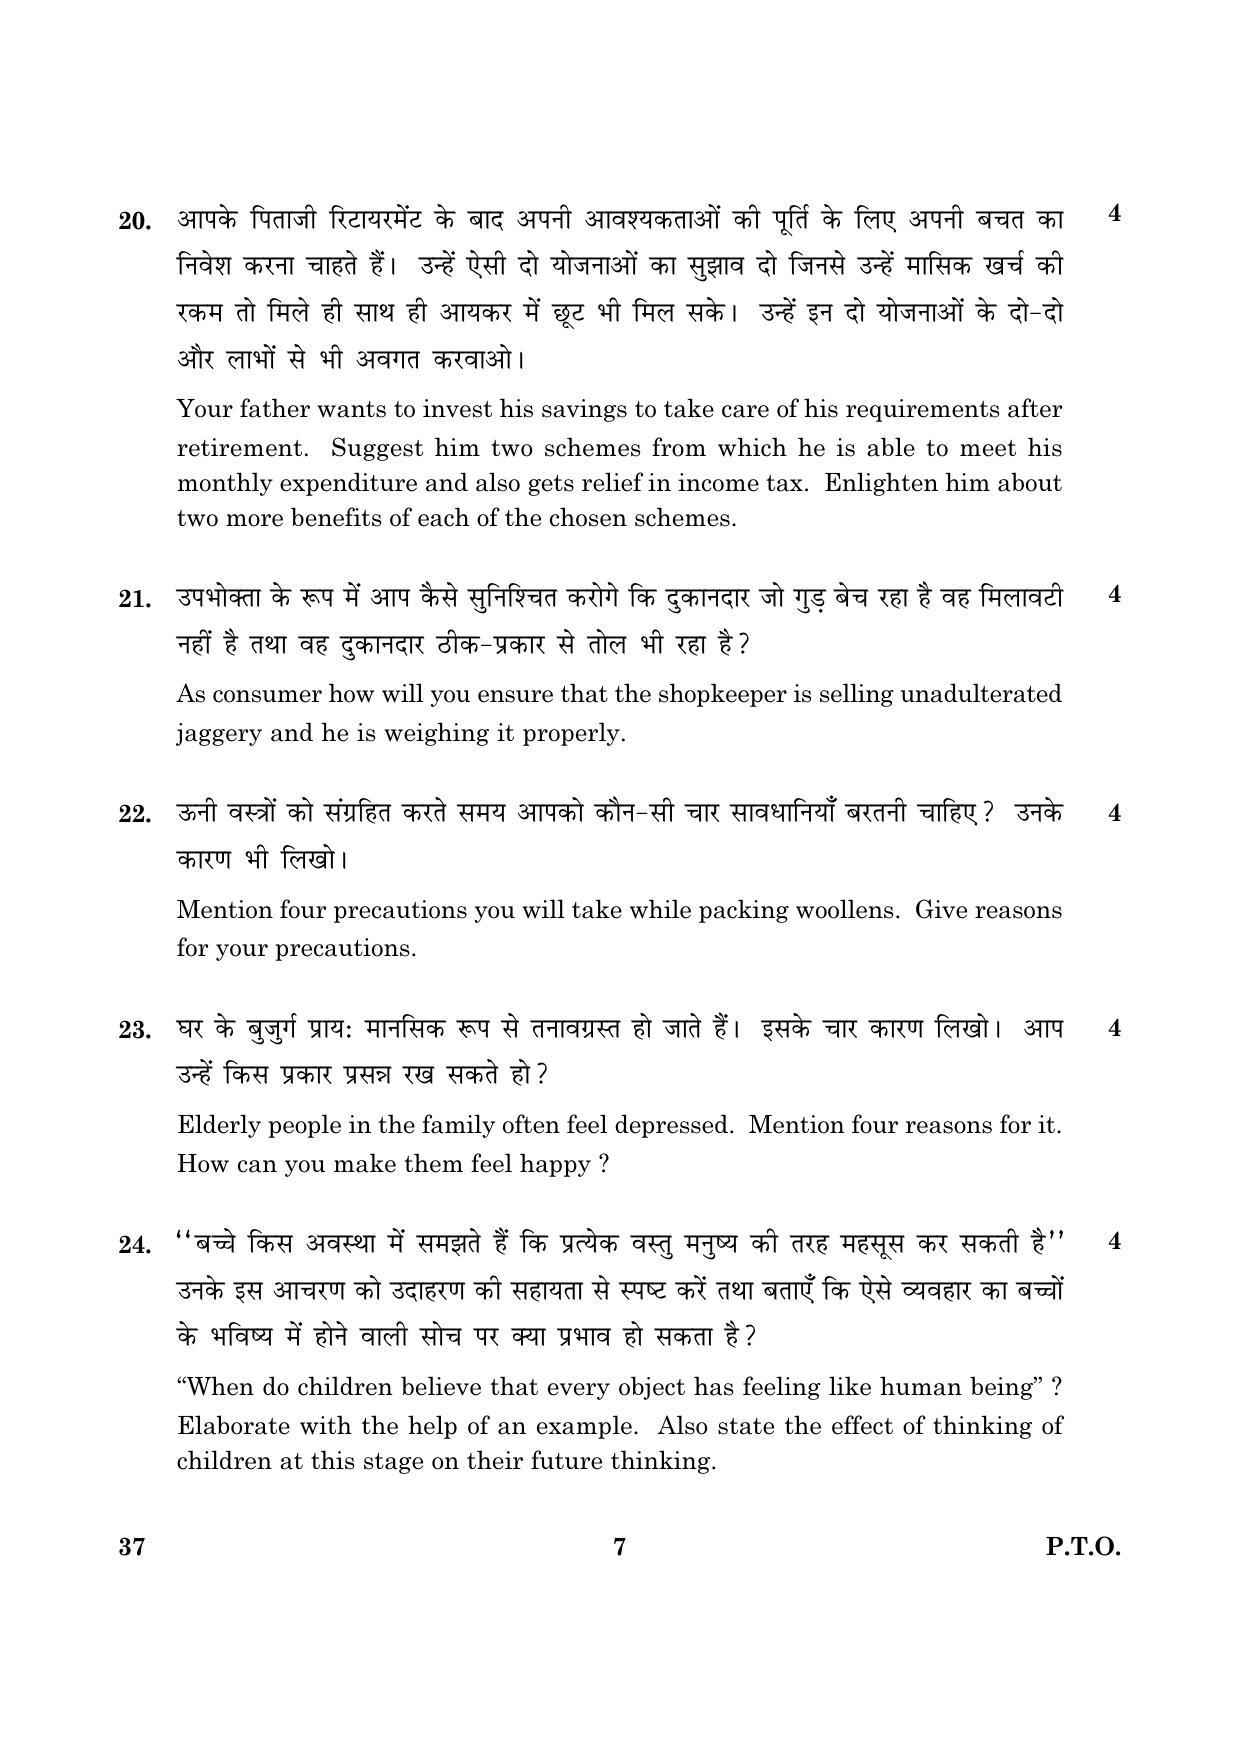 CBSE Class 10 037 Home Science 2016 Question Paper - Page 7